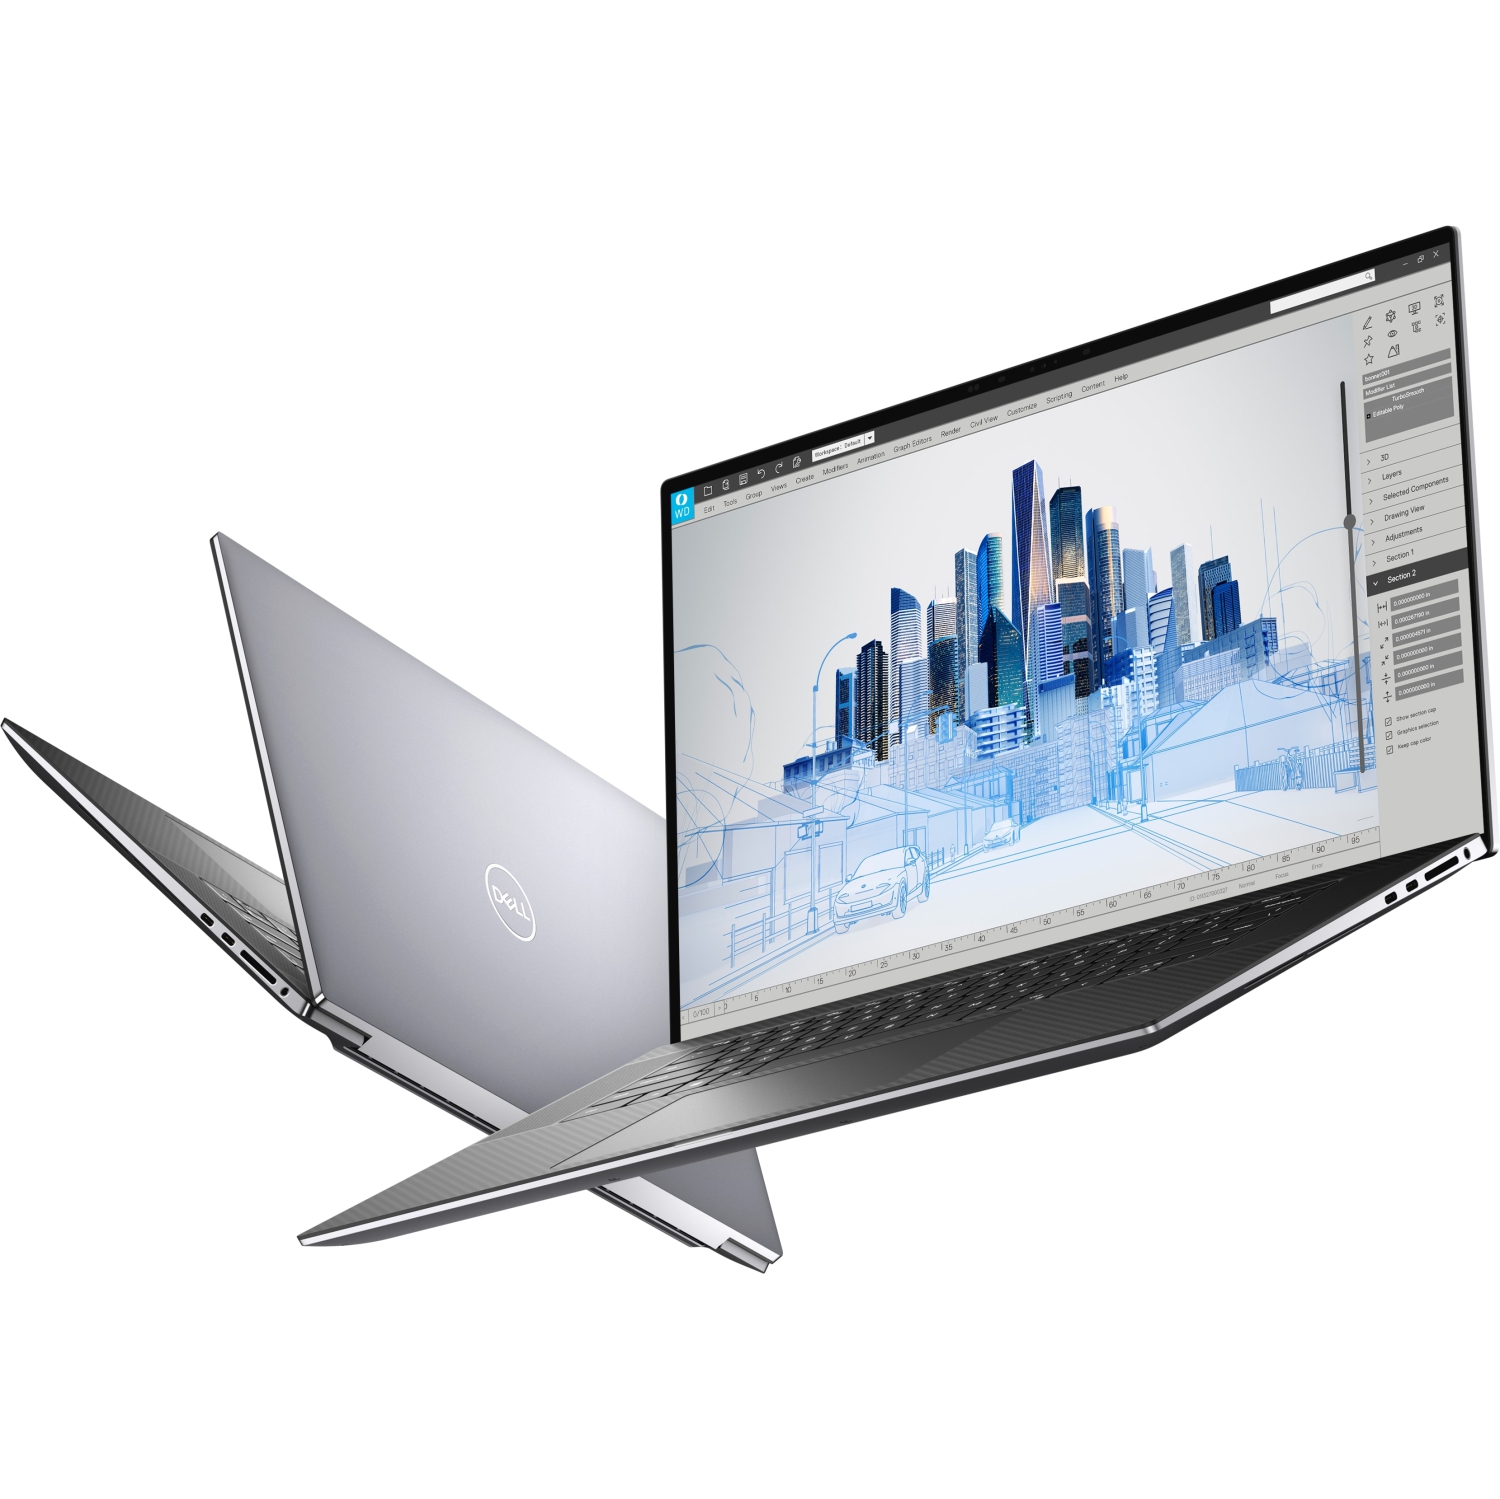 Refurbished (Excellent) - Dell Precision 5000 5760 Workstation Laptop (2021), 17" 4K Touch, Core i9, 512GB SSD, 32GB RAM, RTX A3000, 5 GHz, 11th Gen CPU Certified